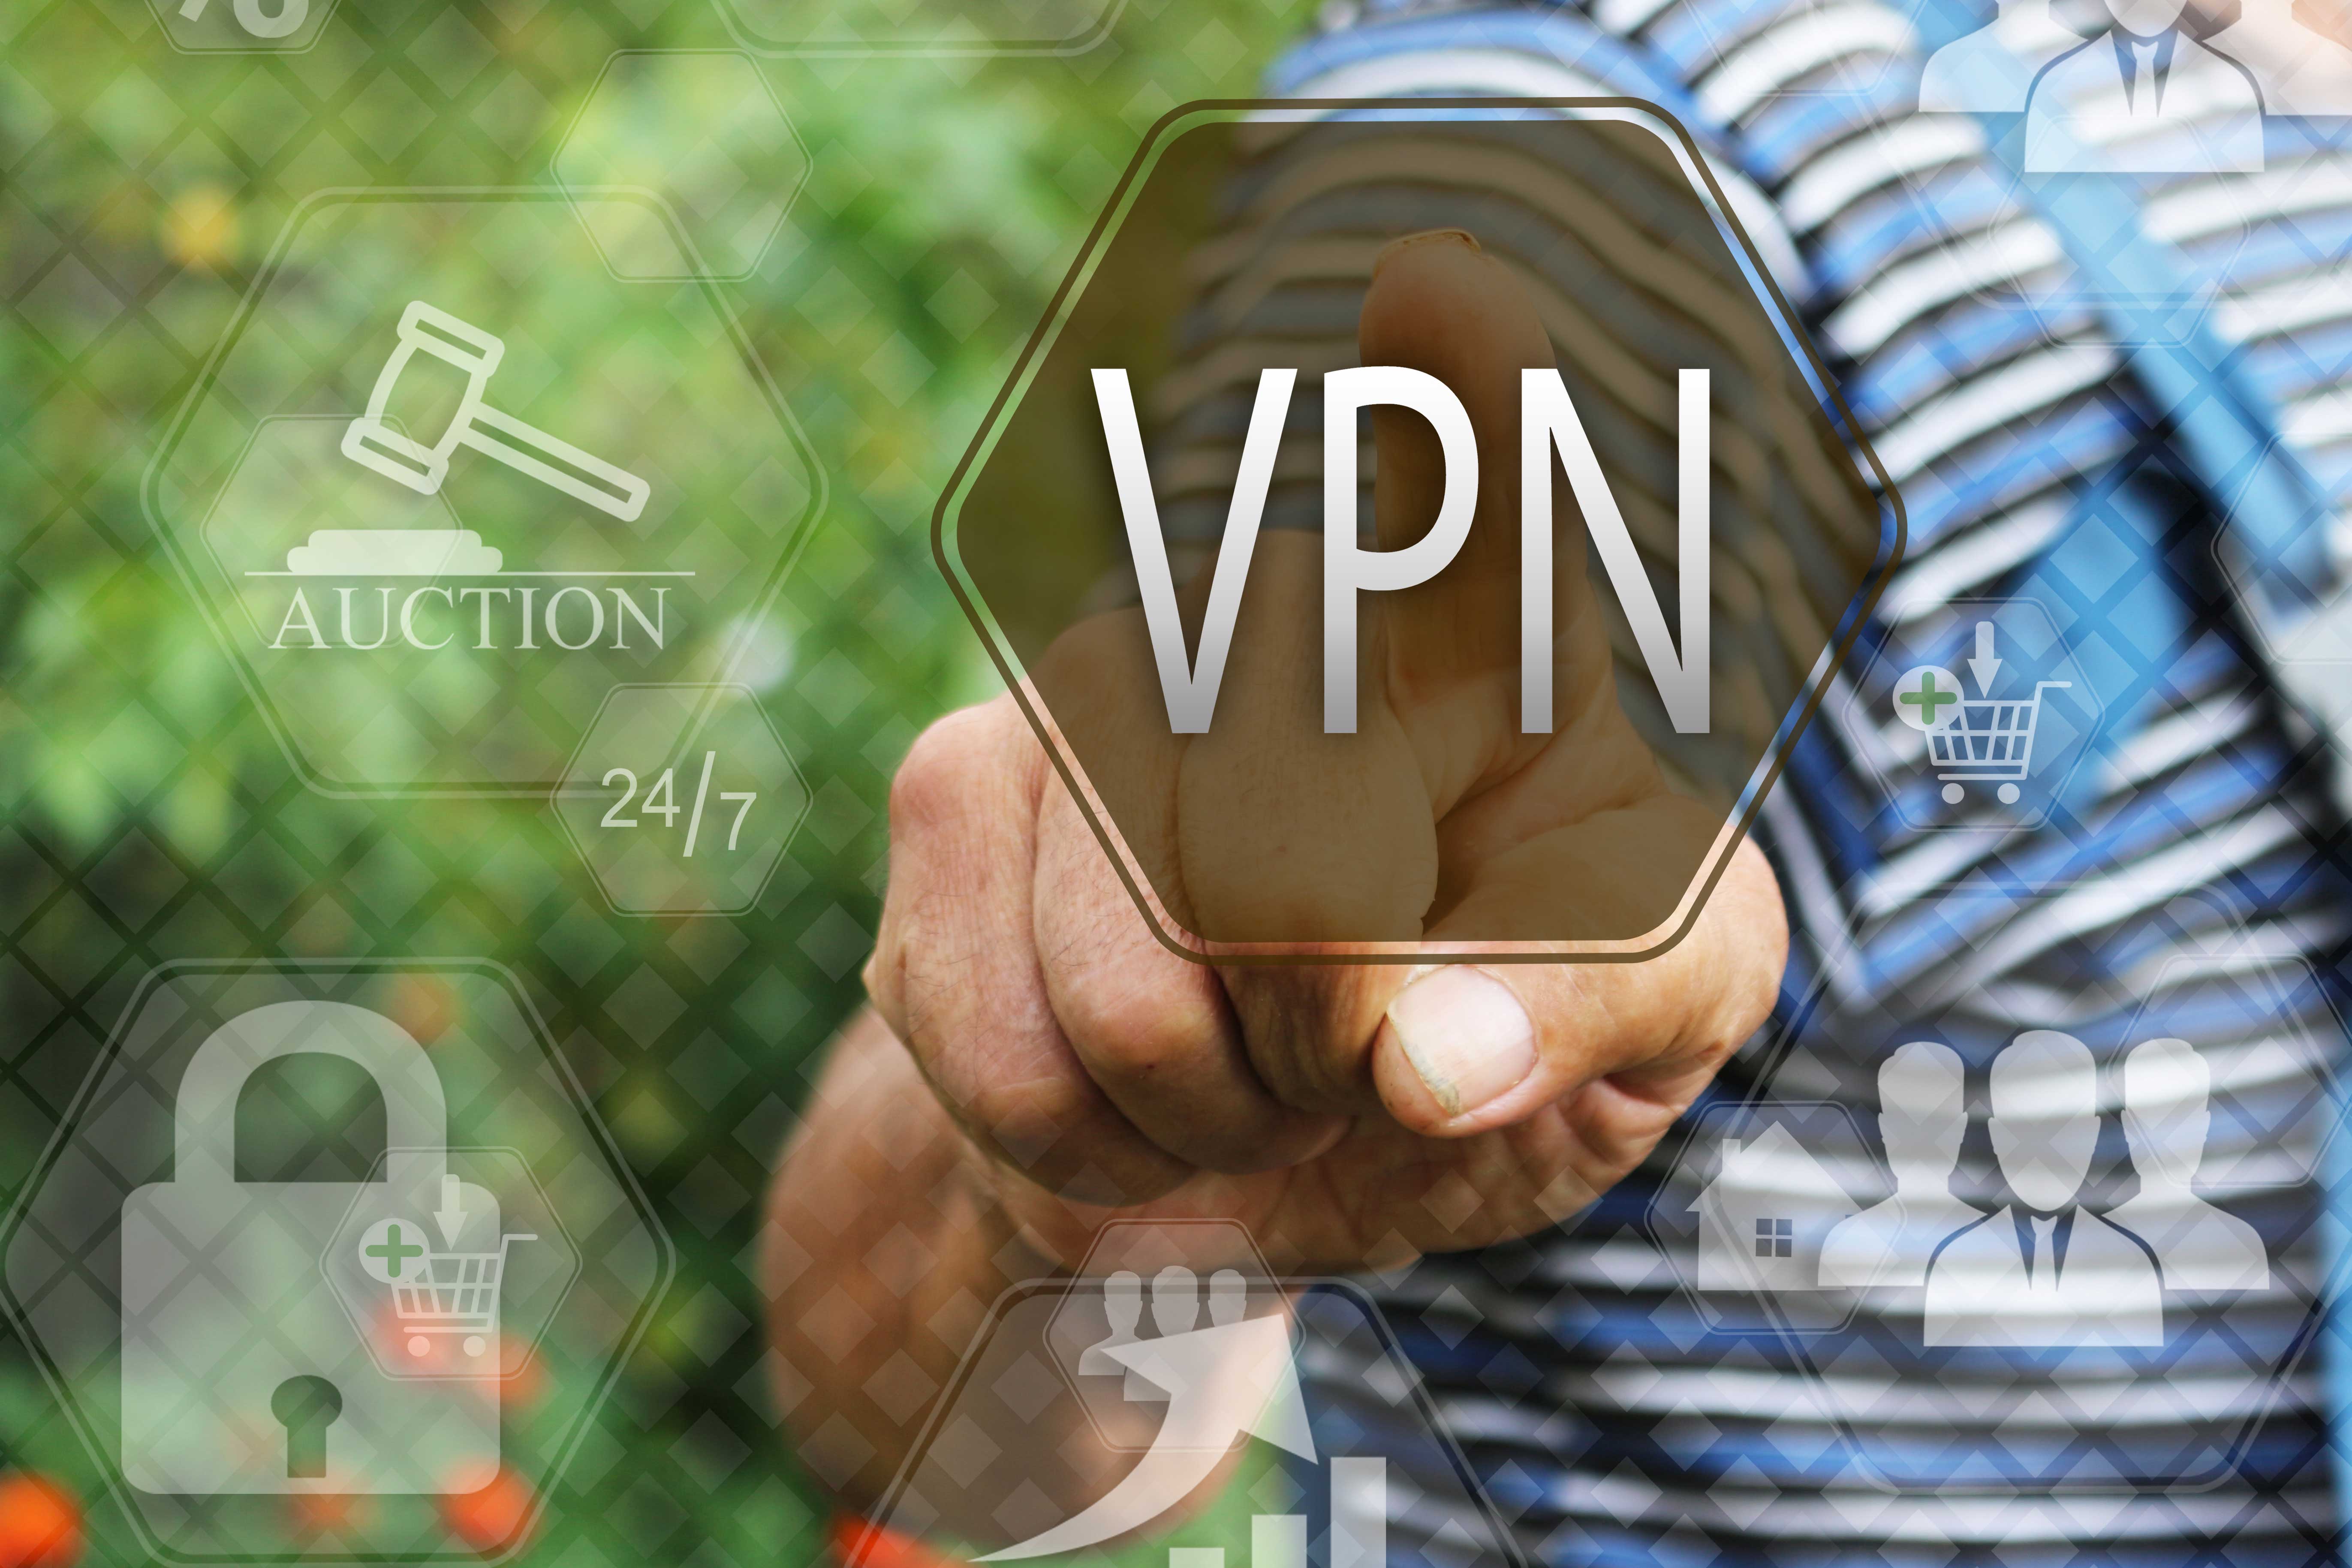 Should you use a Virtual Private Network (VPN) to protect your privacy?